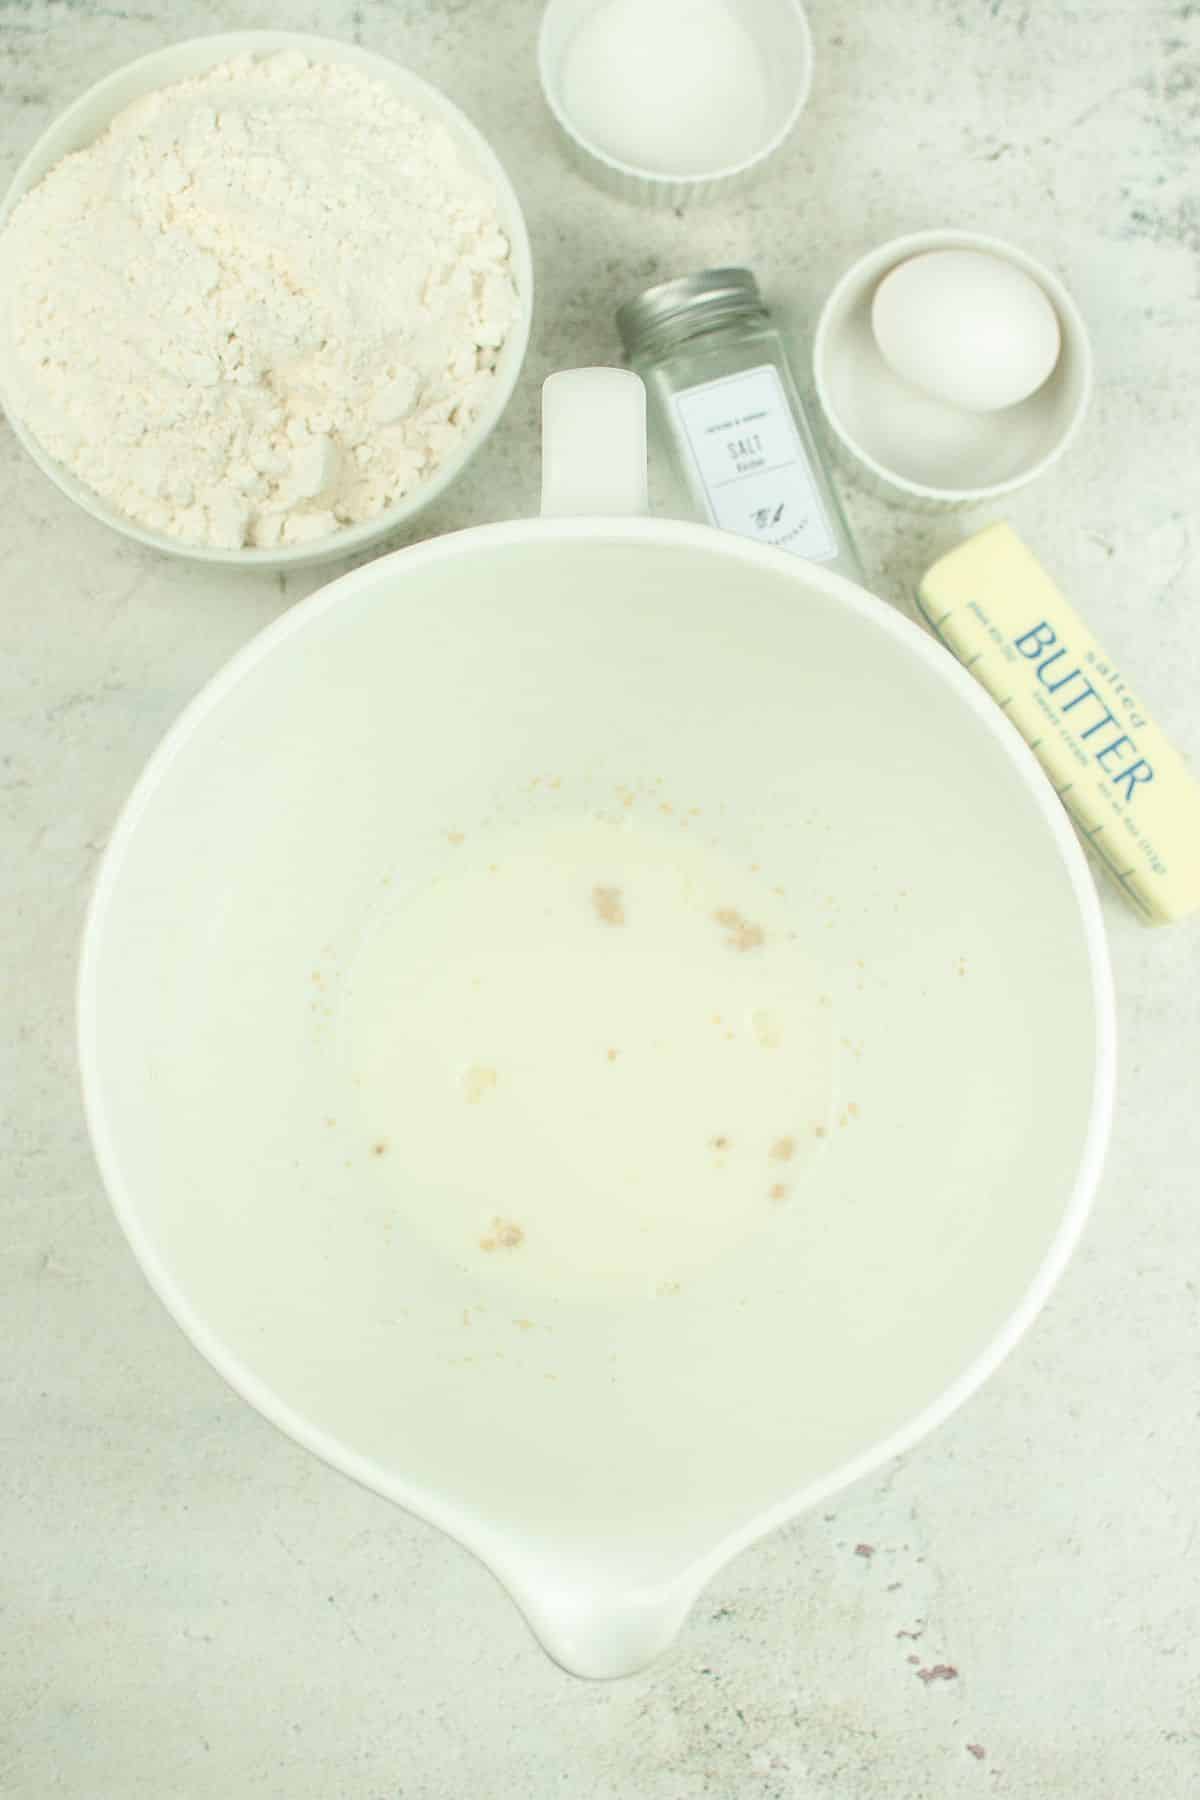 yeast and milk in a white mixing bowl on a textured background